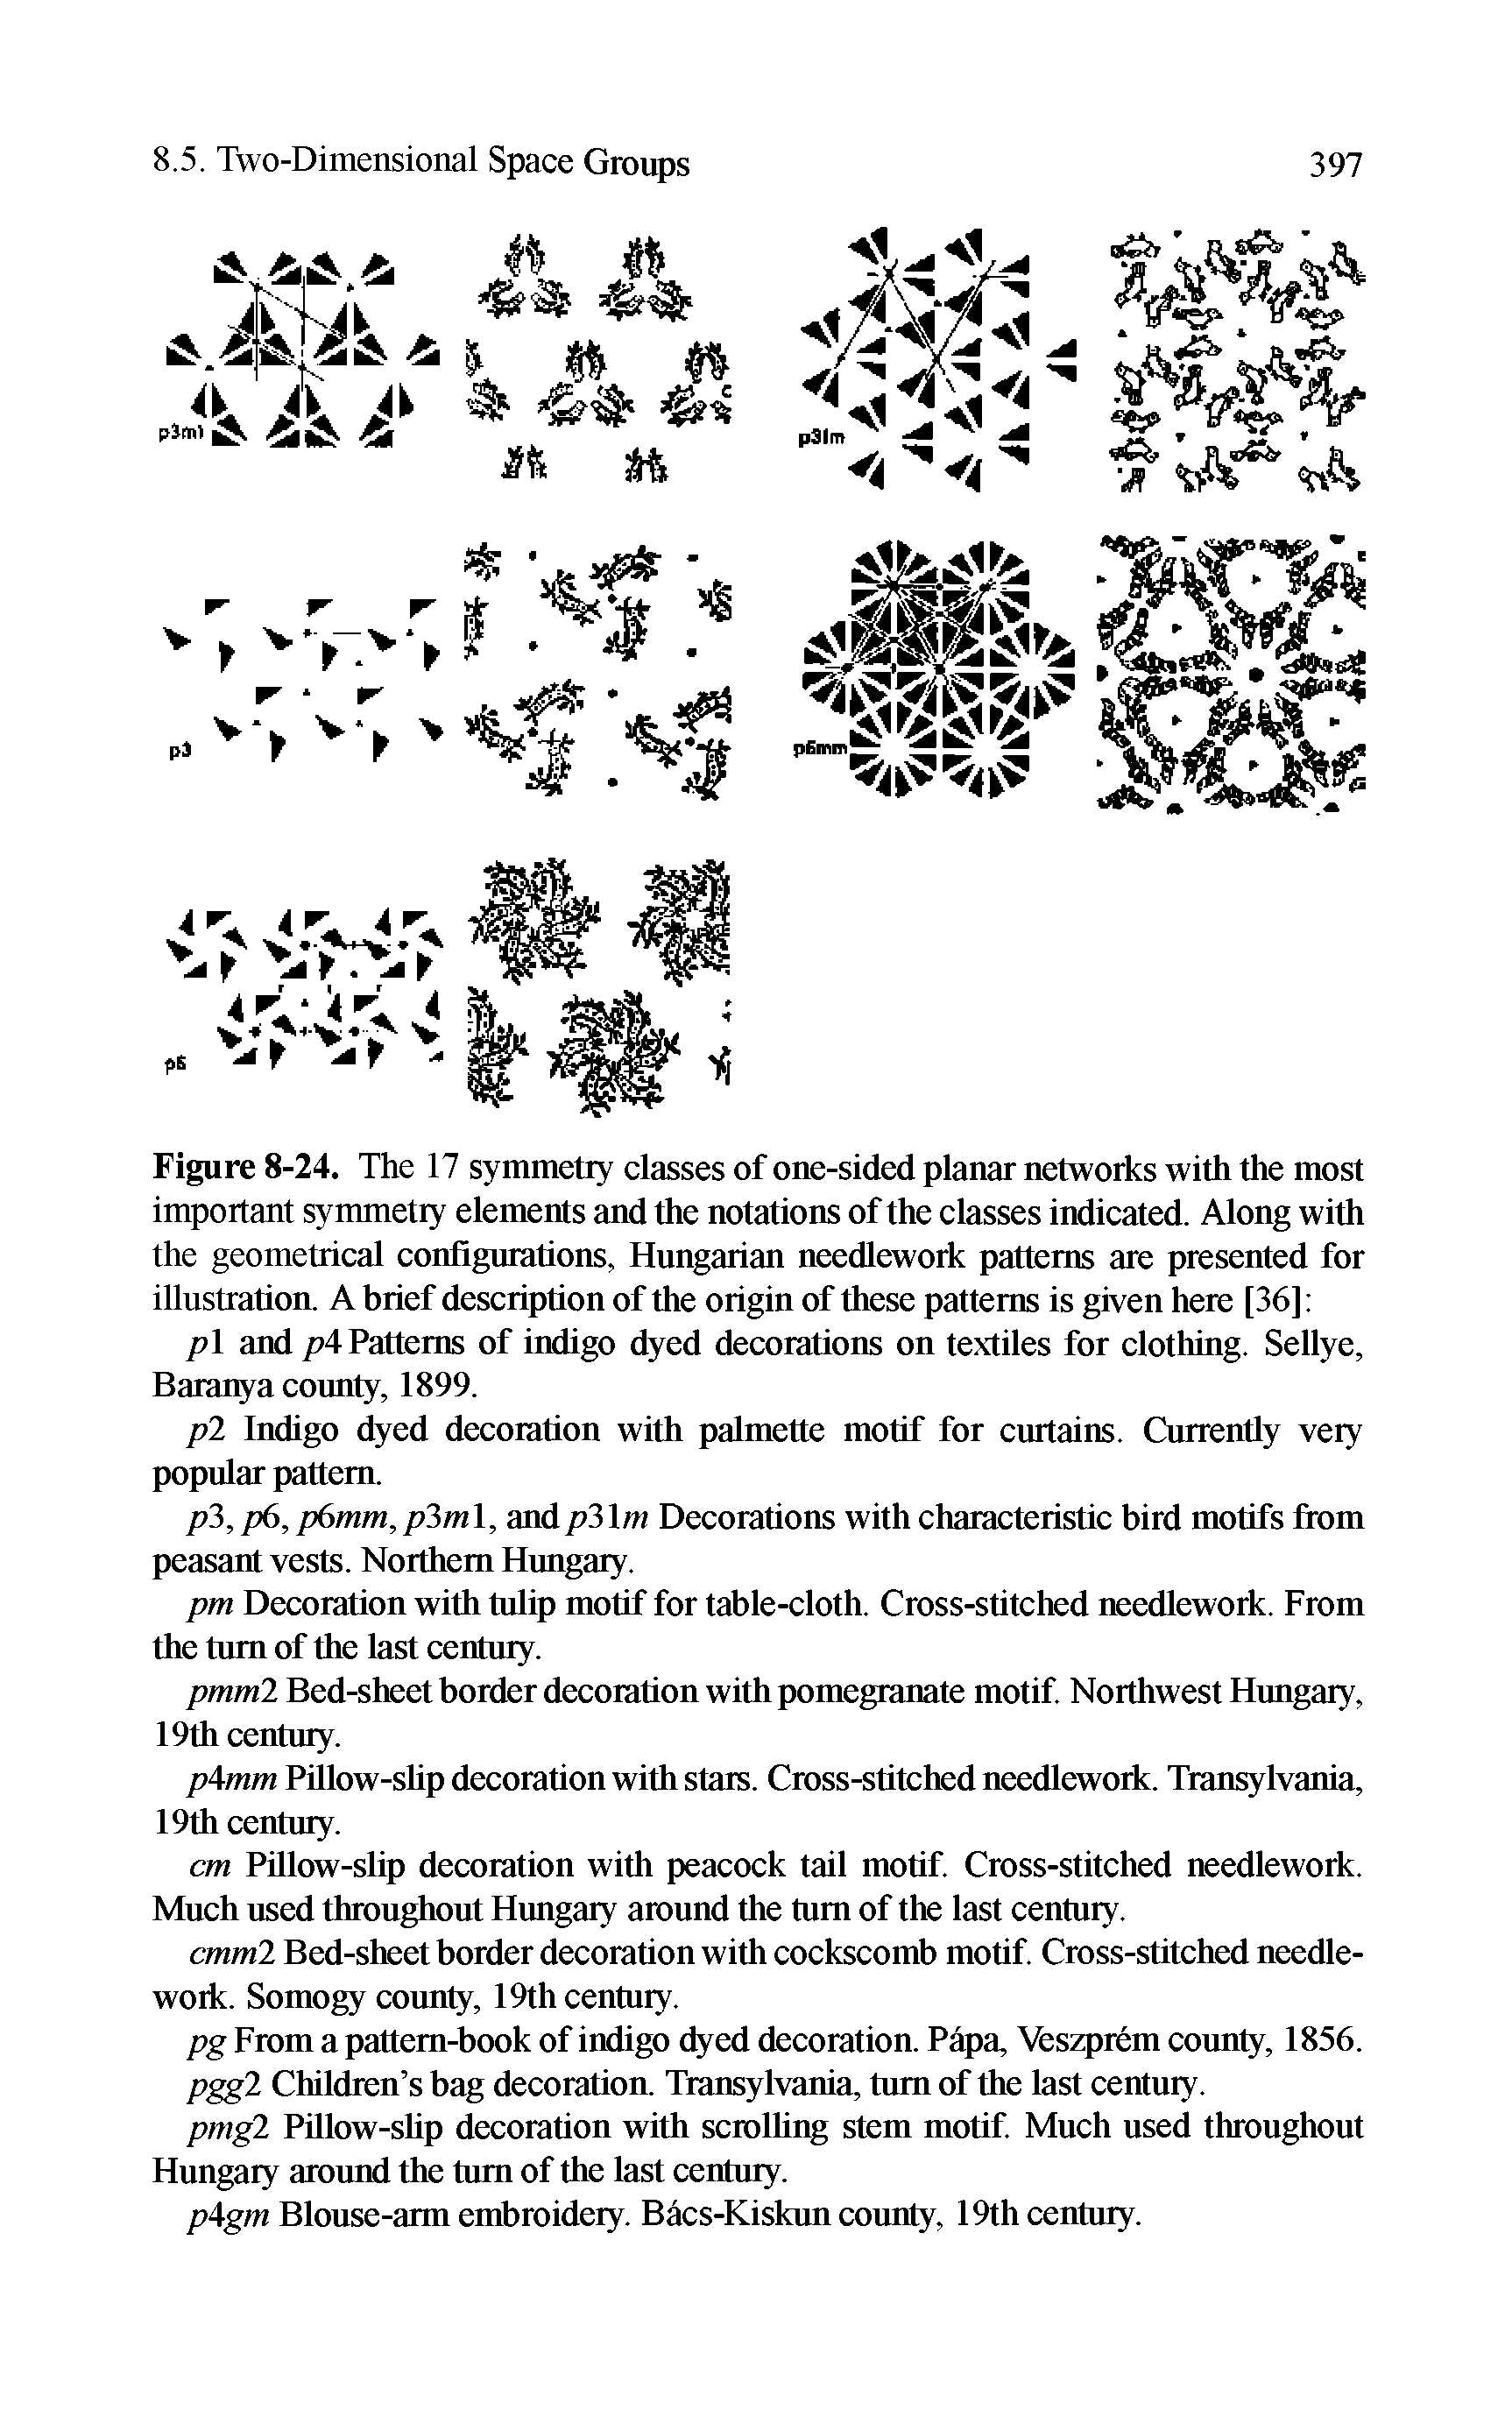 Figure 8-24. The 17 symmetry classes of one-sided planar networks with the most important symmetry elements and the notations of the classes indicated. Along with the geometrical configurations, Hungarian needlework patterns are presented for illustration. A brief description of the origin of these patterns is given here [36] ...